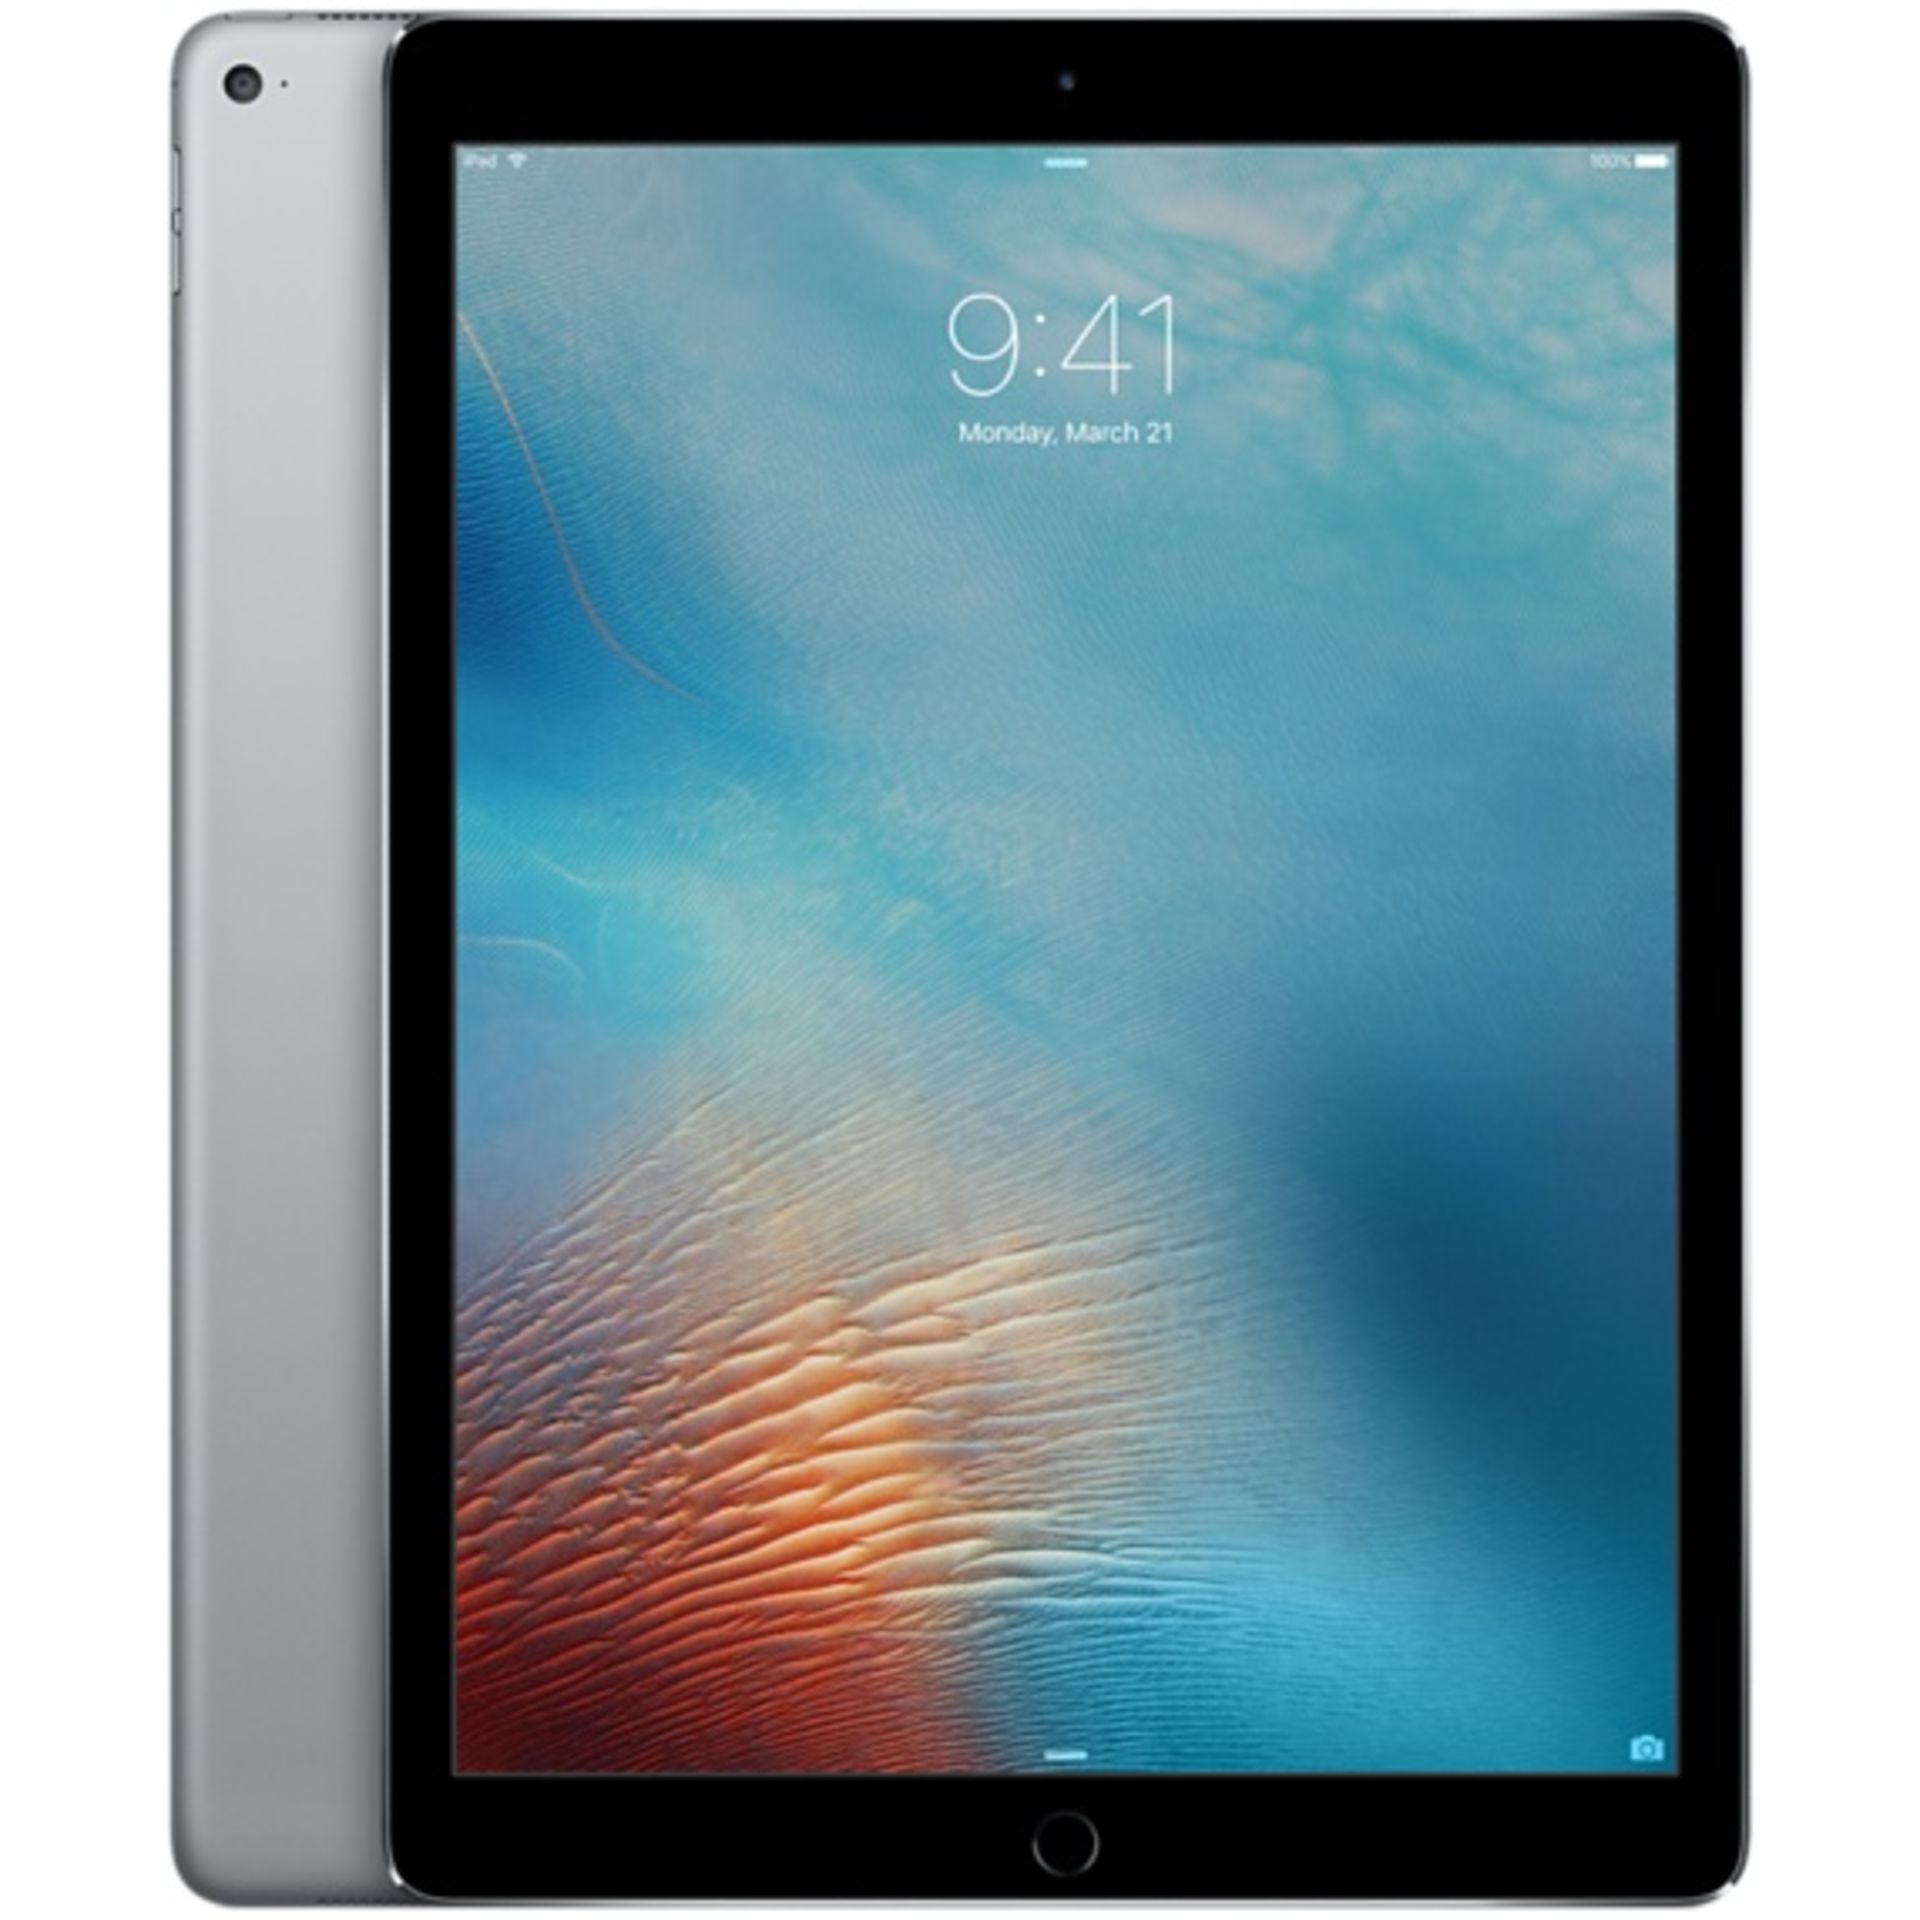 V Grade B Apple iPad Pro 12.9 - Space Grey - 32GB Wi-Fi Only - May have cosmetic damage to the Back